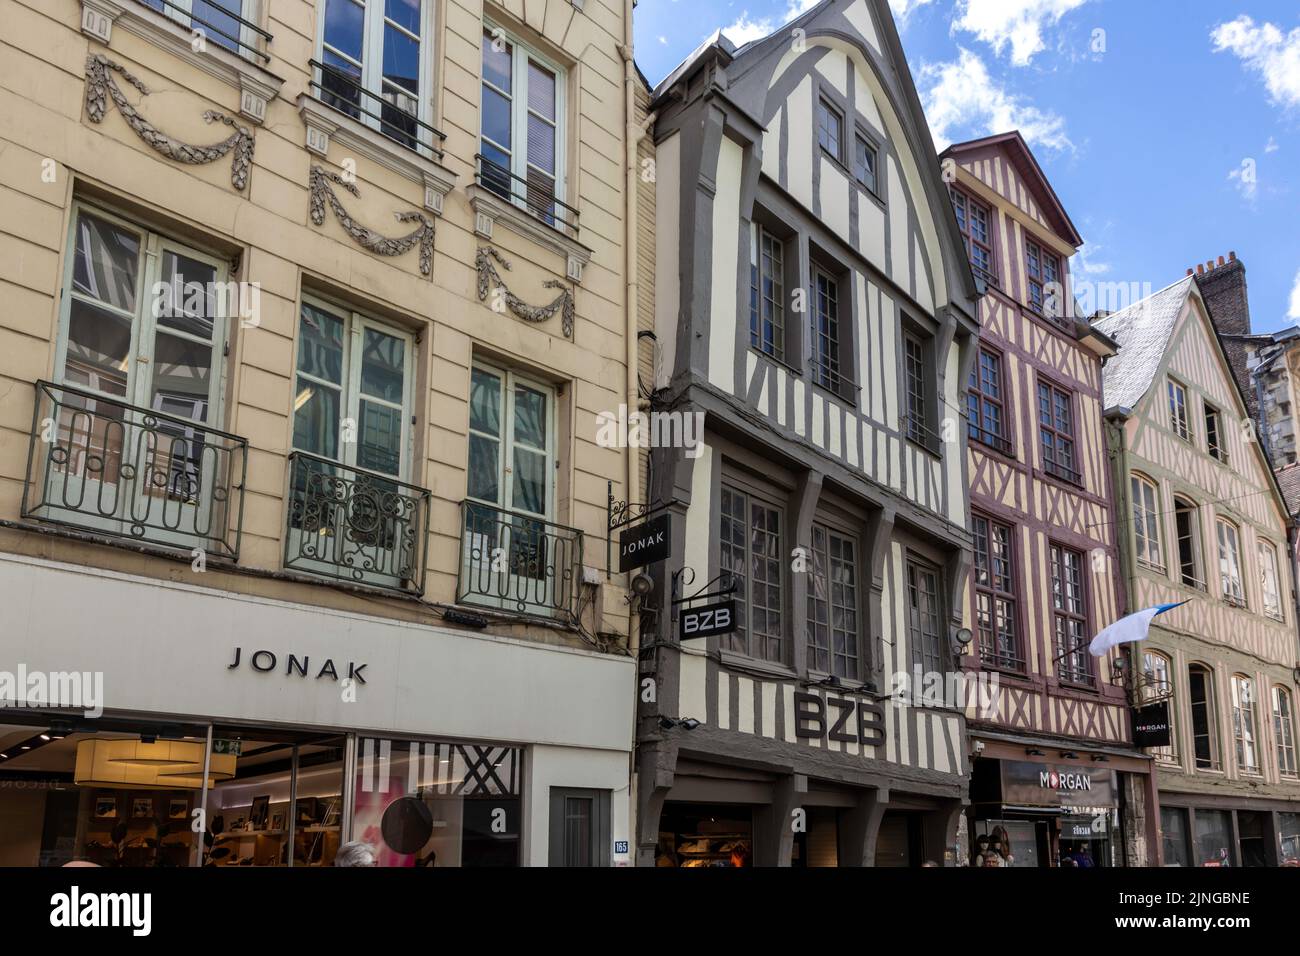 Typical timber-framed buildings in Rouen's old town in Normandy France Stock Photo